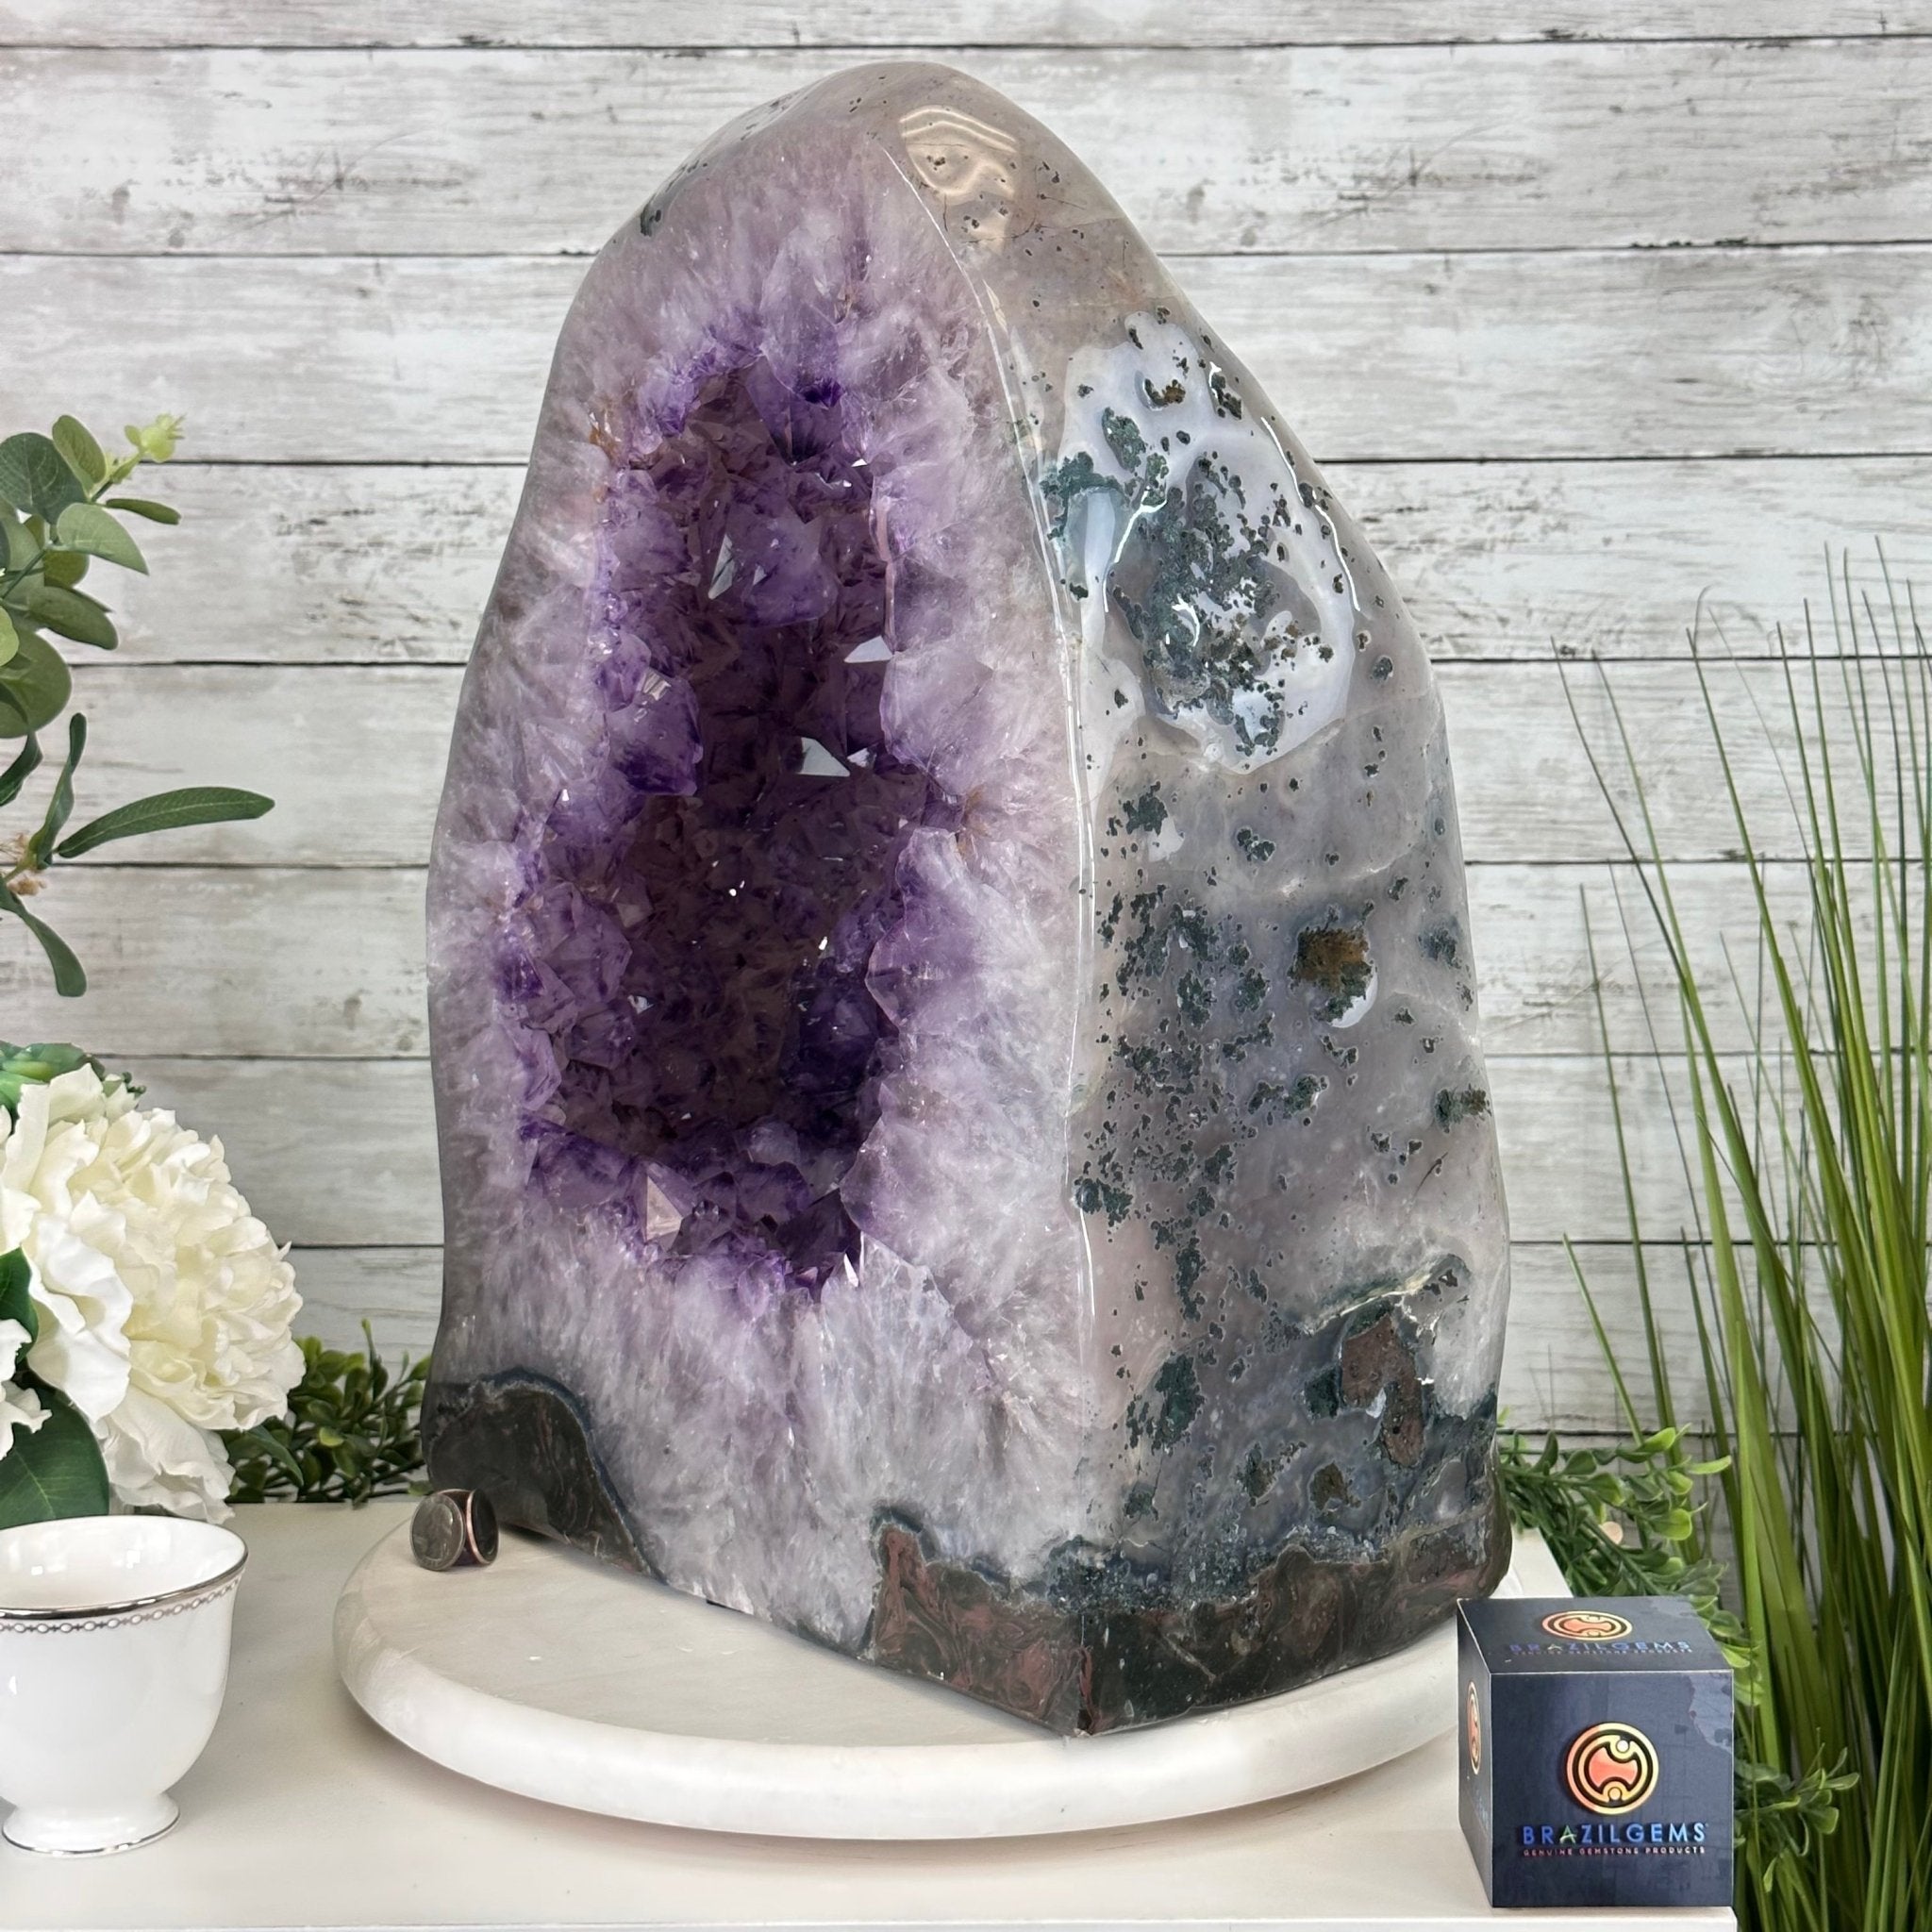 Extra Quality Polished Brazilian Amethyst Cathedral, 102.1 lbs & 18.3" tall Model #5602-0045 by Brazil Gems - Brazil GemsBrazil GemsExtra Quality Polished Brazilian Amethyst Cathedral, 102.1 lbs & 18.3" tall Model #5602-0045 by Brazil GemsPolished Cathedrals5602-0045